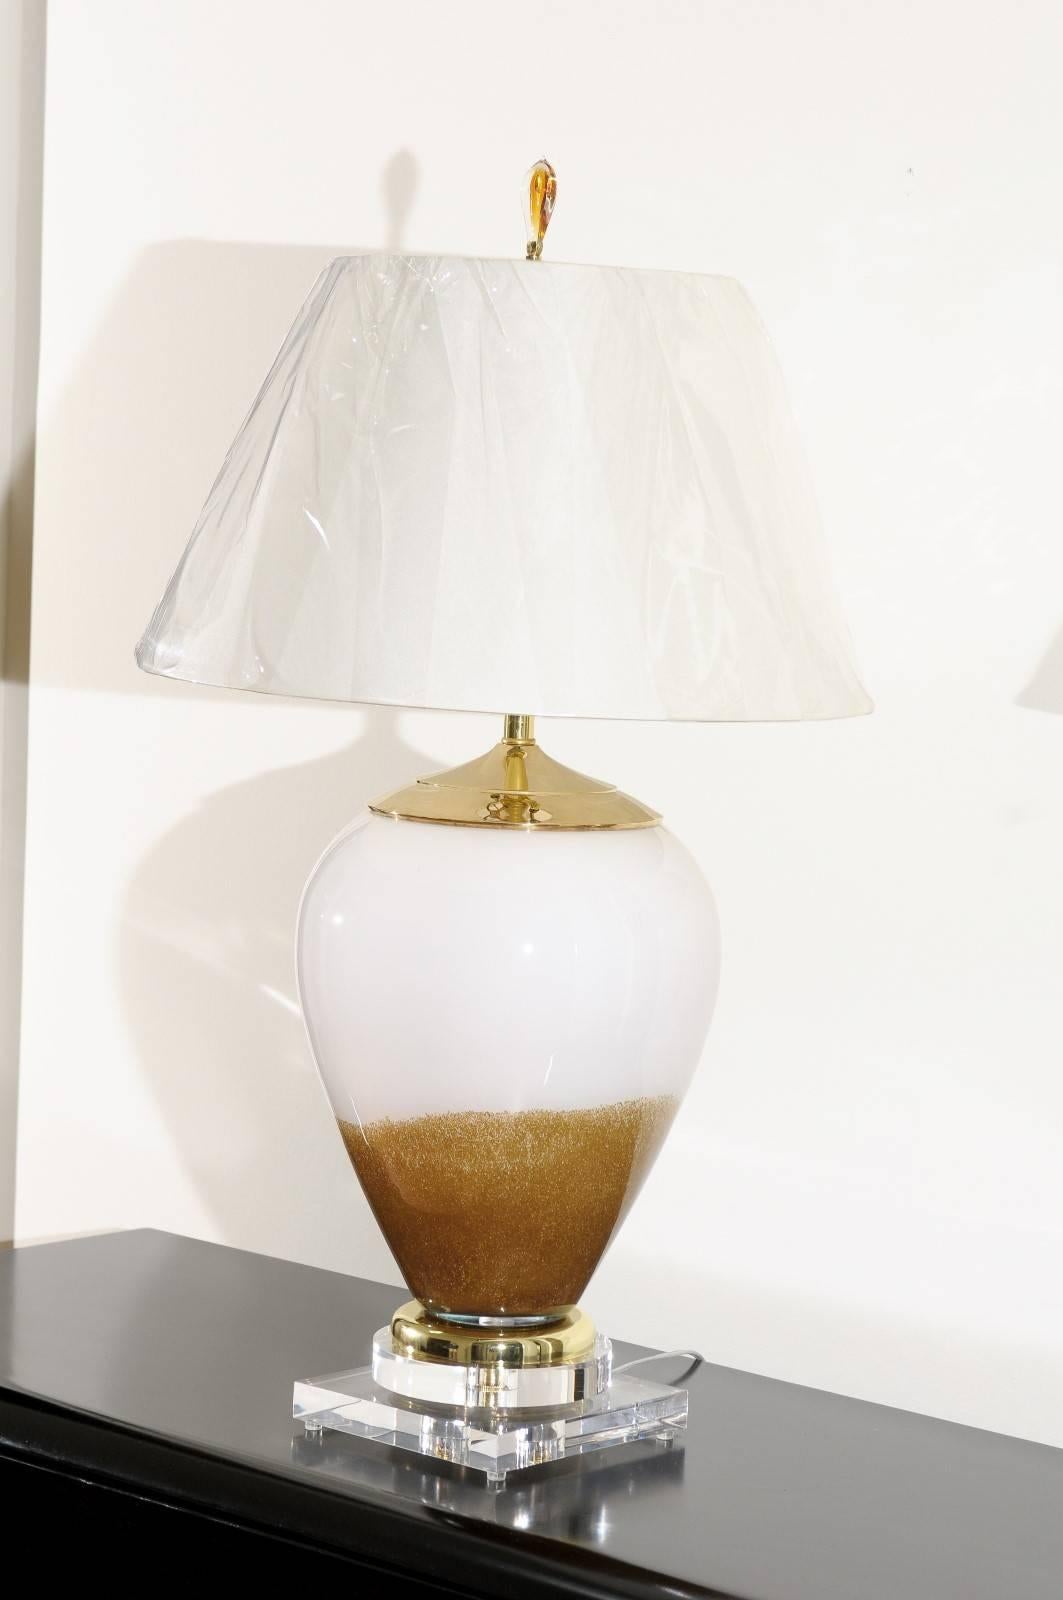 Exceptional Pair of Blown Glass Lamps in Caramel and Cream, Poland, circa 1990 For Sale 2